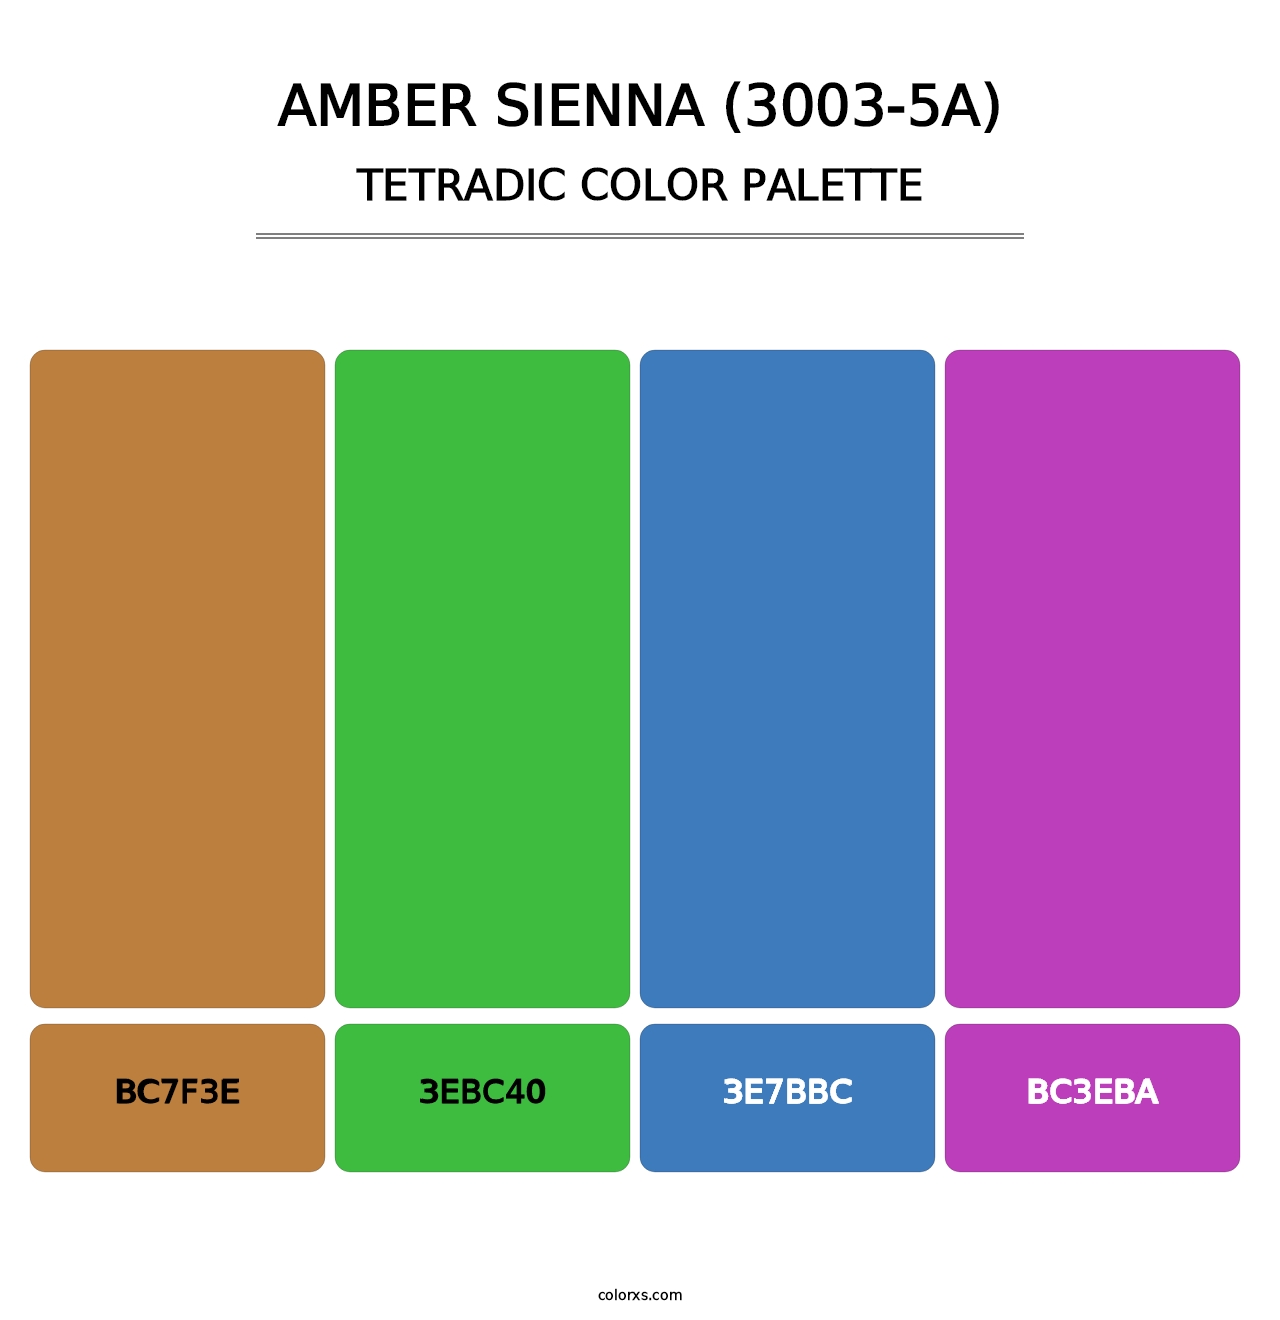 Amber Sienna (3003-5A) - Tetradic Color Palette